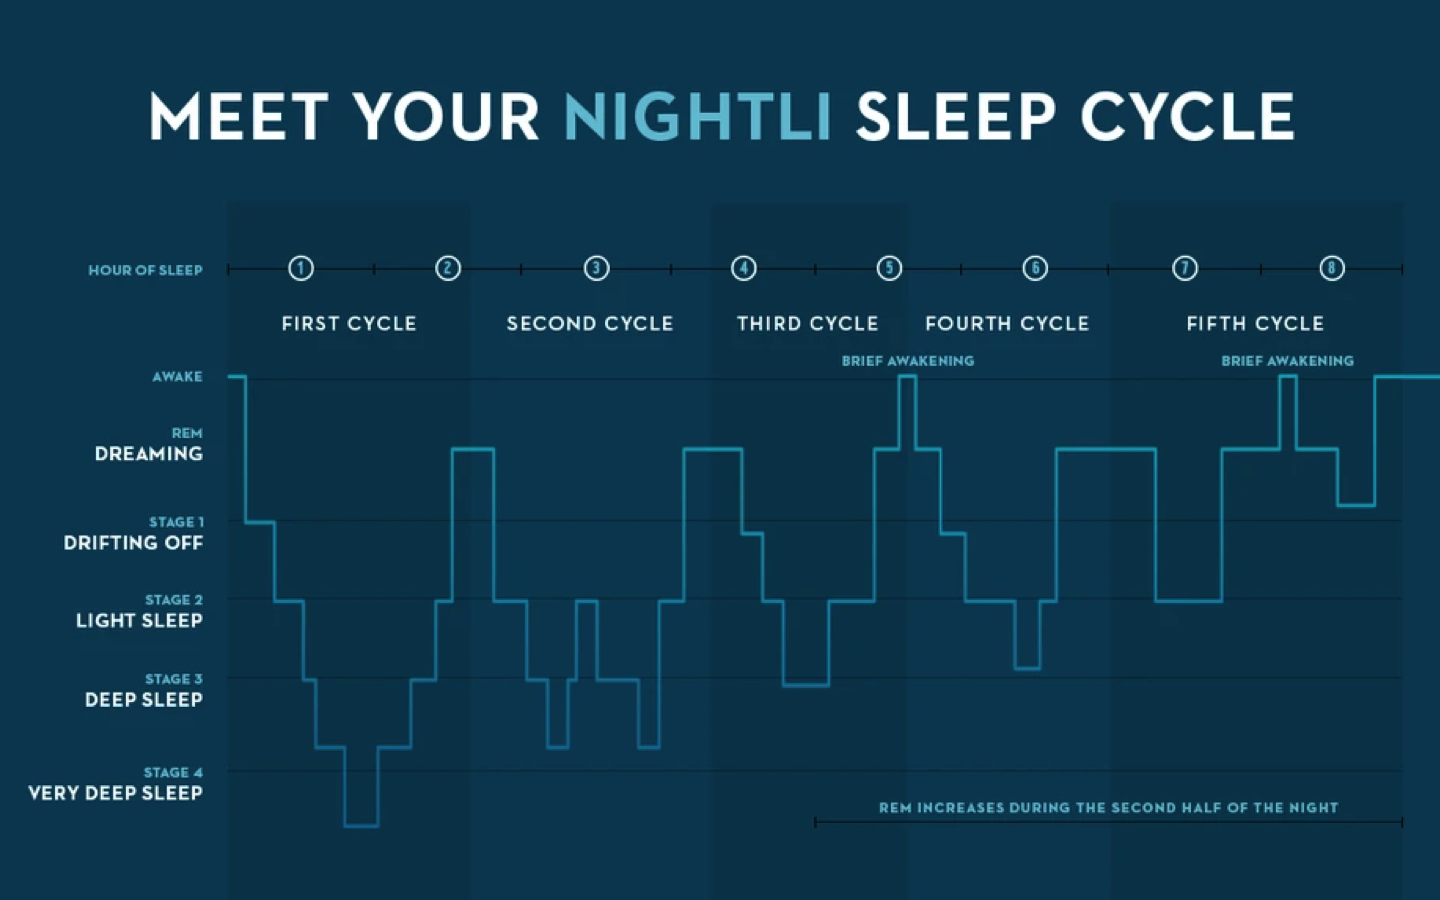 Sleep Cycle. Sleep phases. Stages of Sleep. 4 Sleep Cycles. Different stages